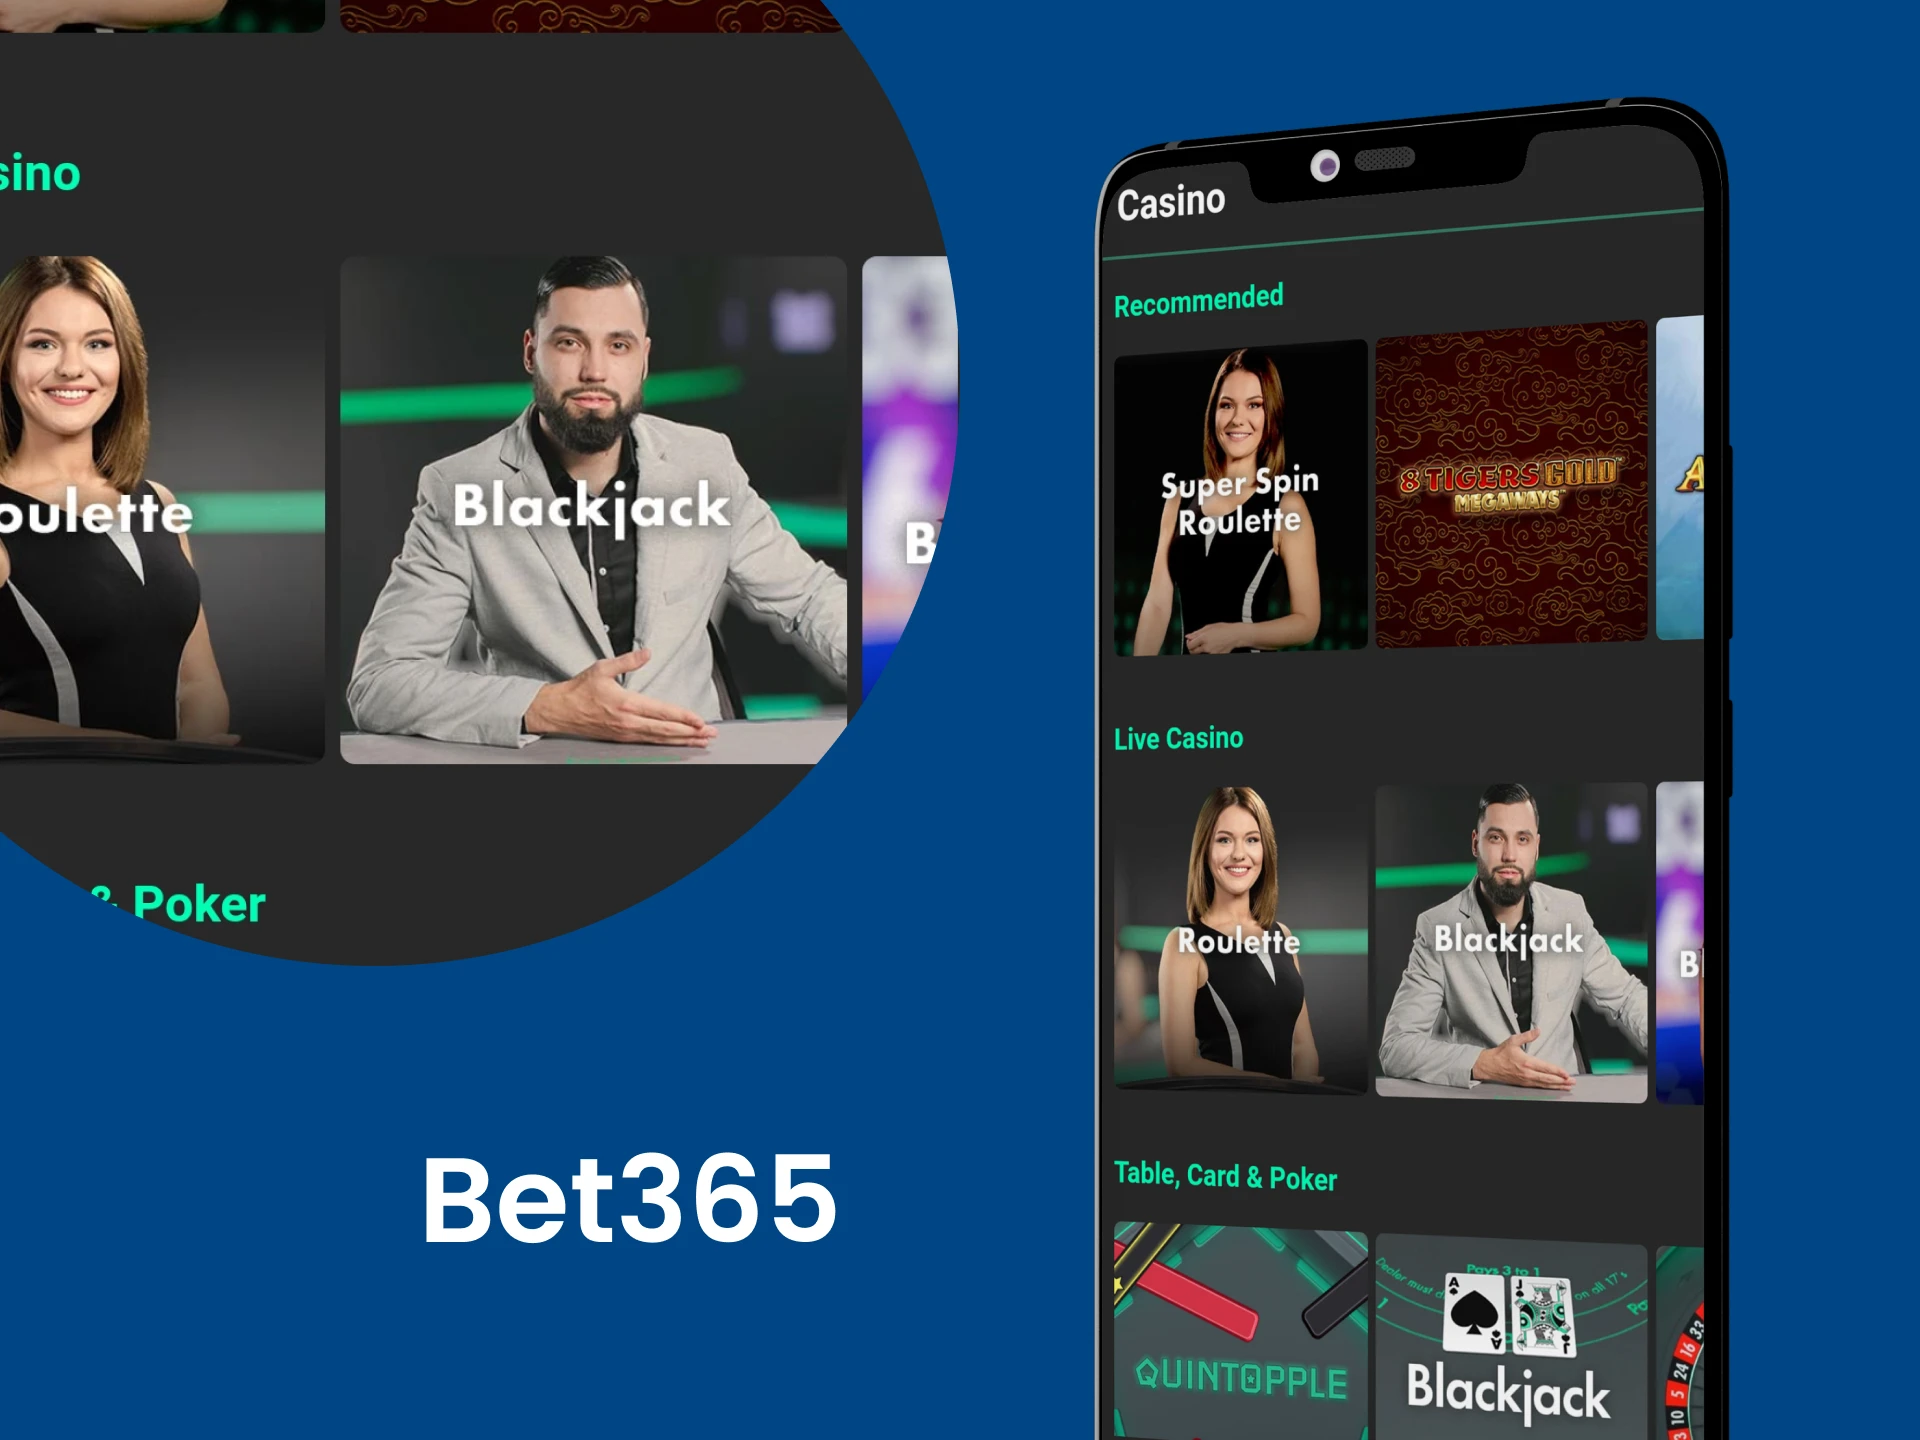 Download the Bet365 app for casino games.